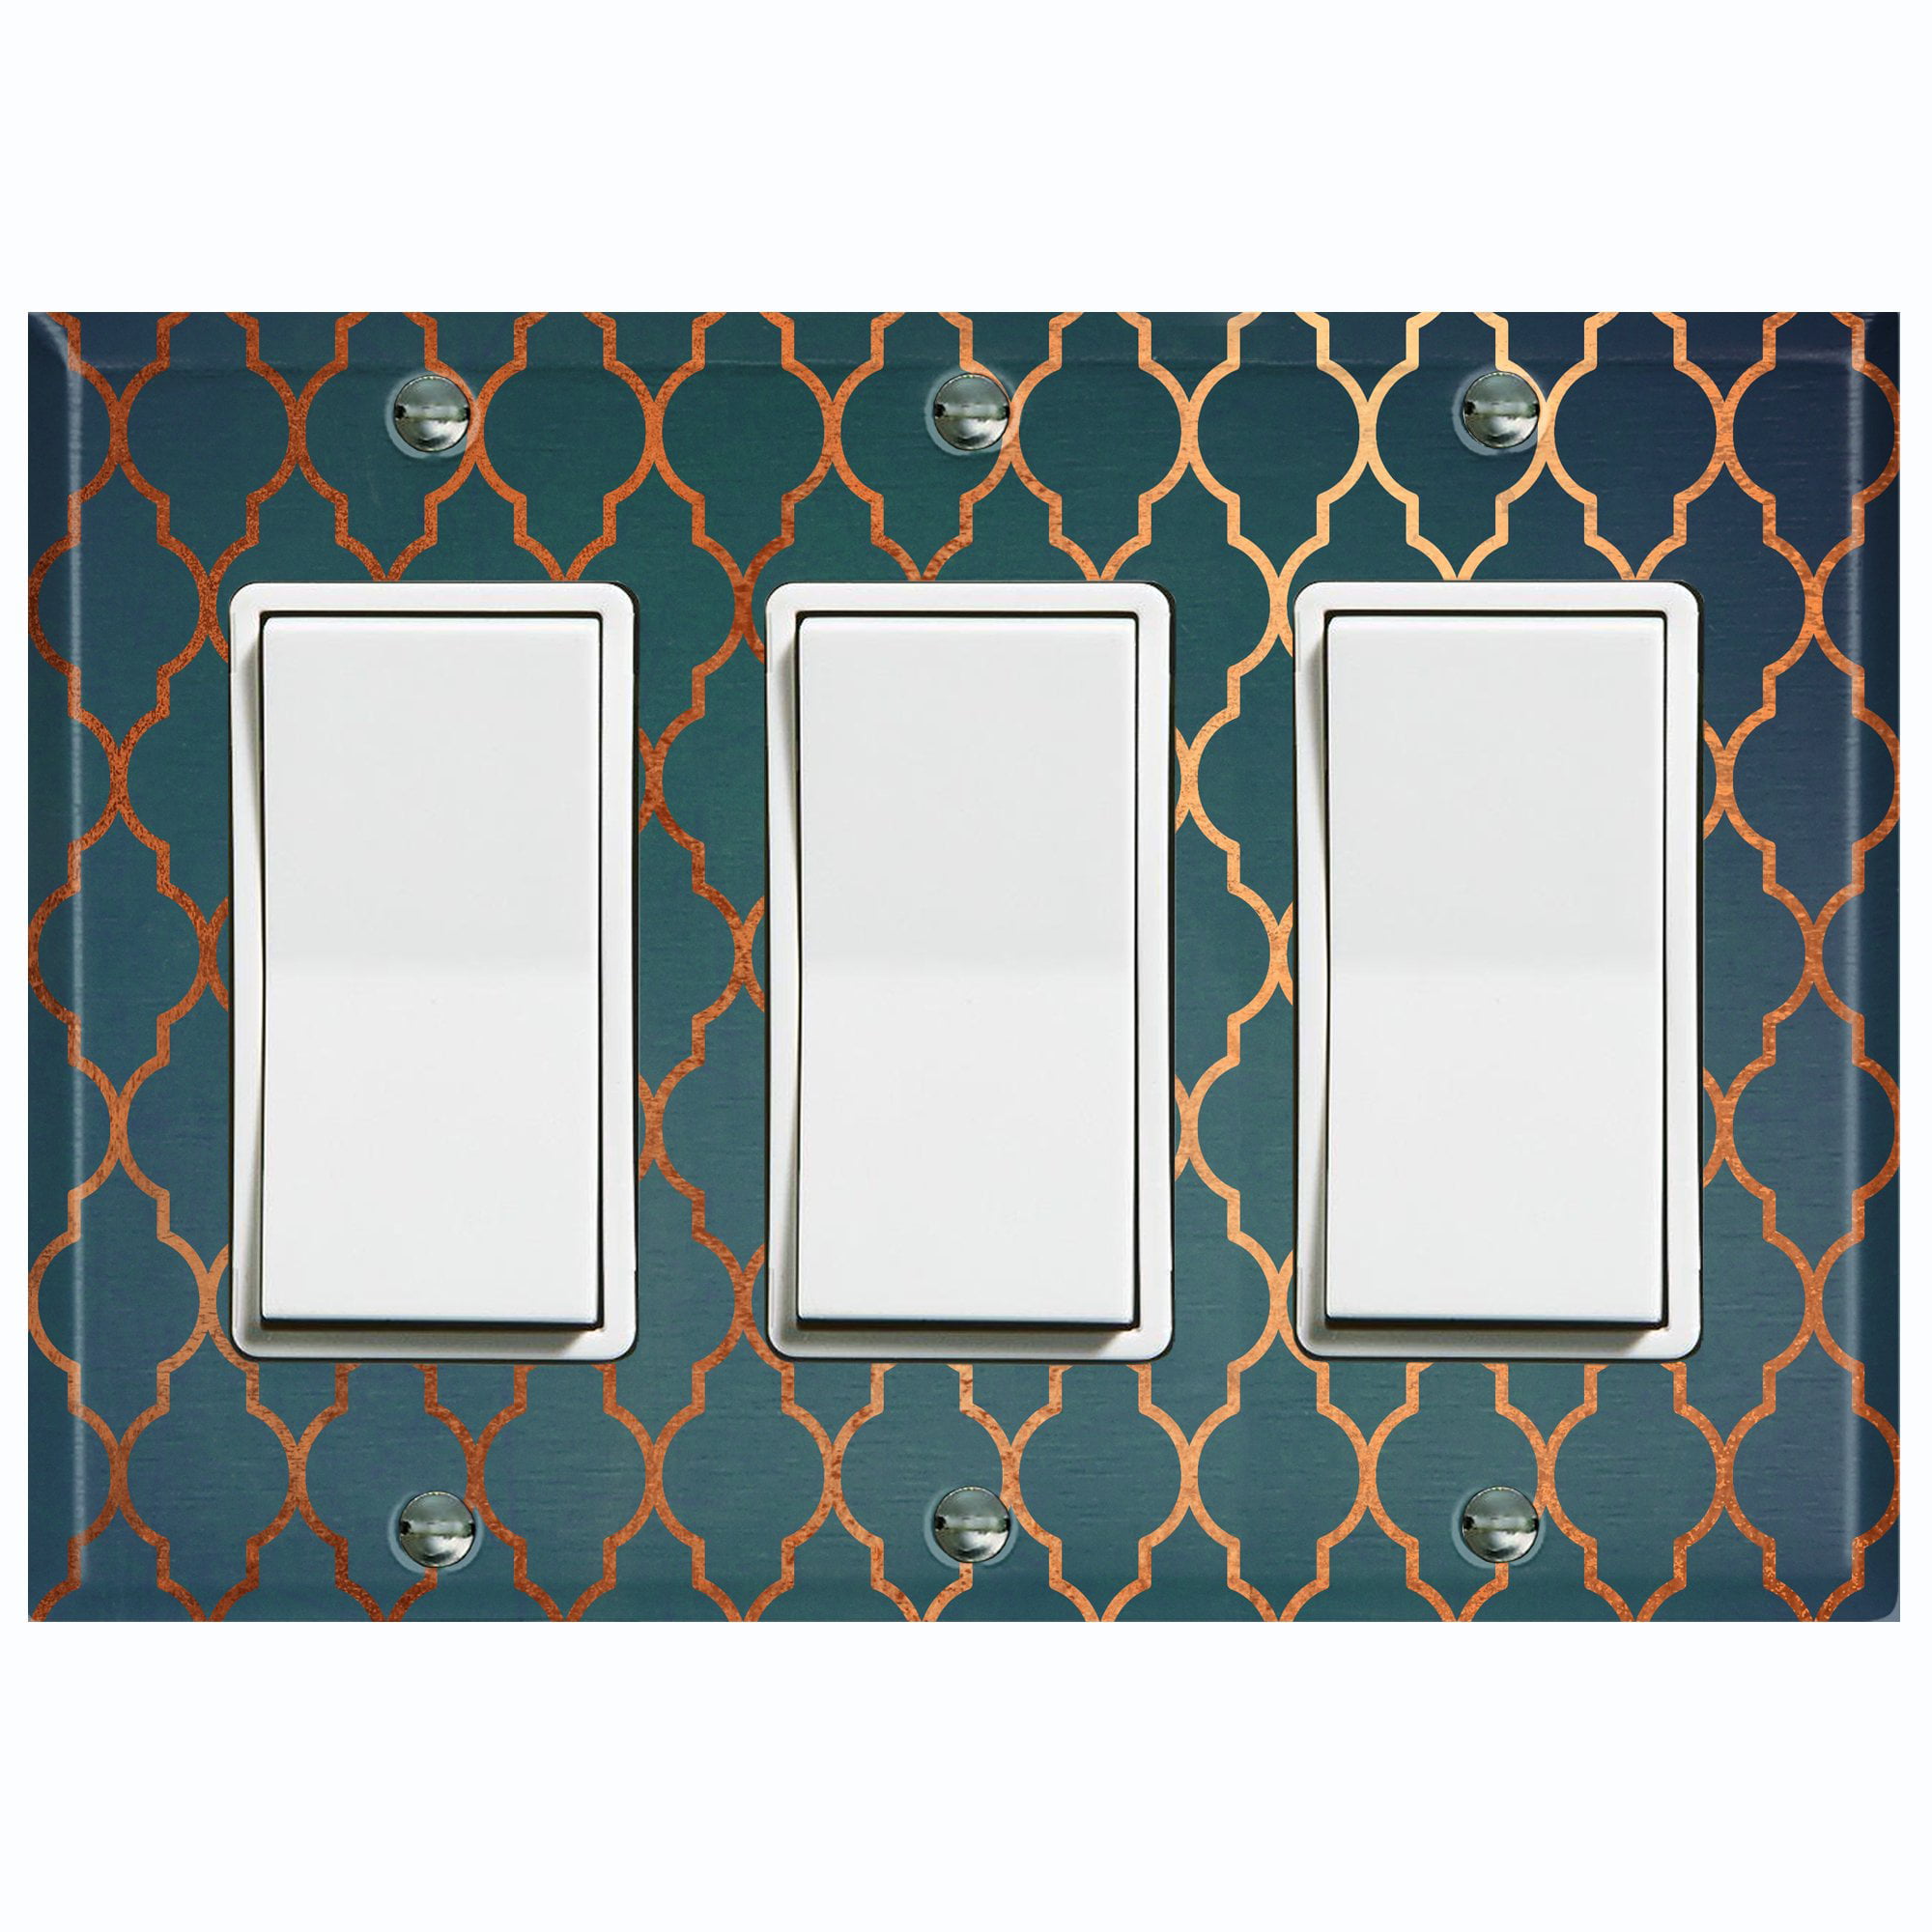 Metal Light Switch Cover Wall Plate Wallpaper Teal Yellow Pattern WAL001 